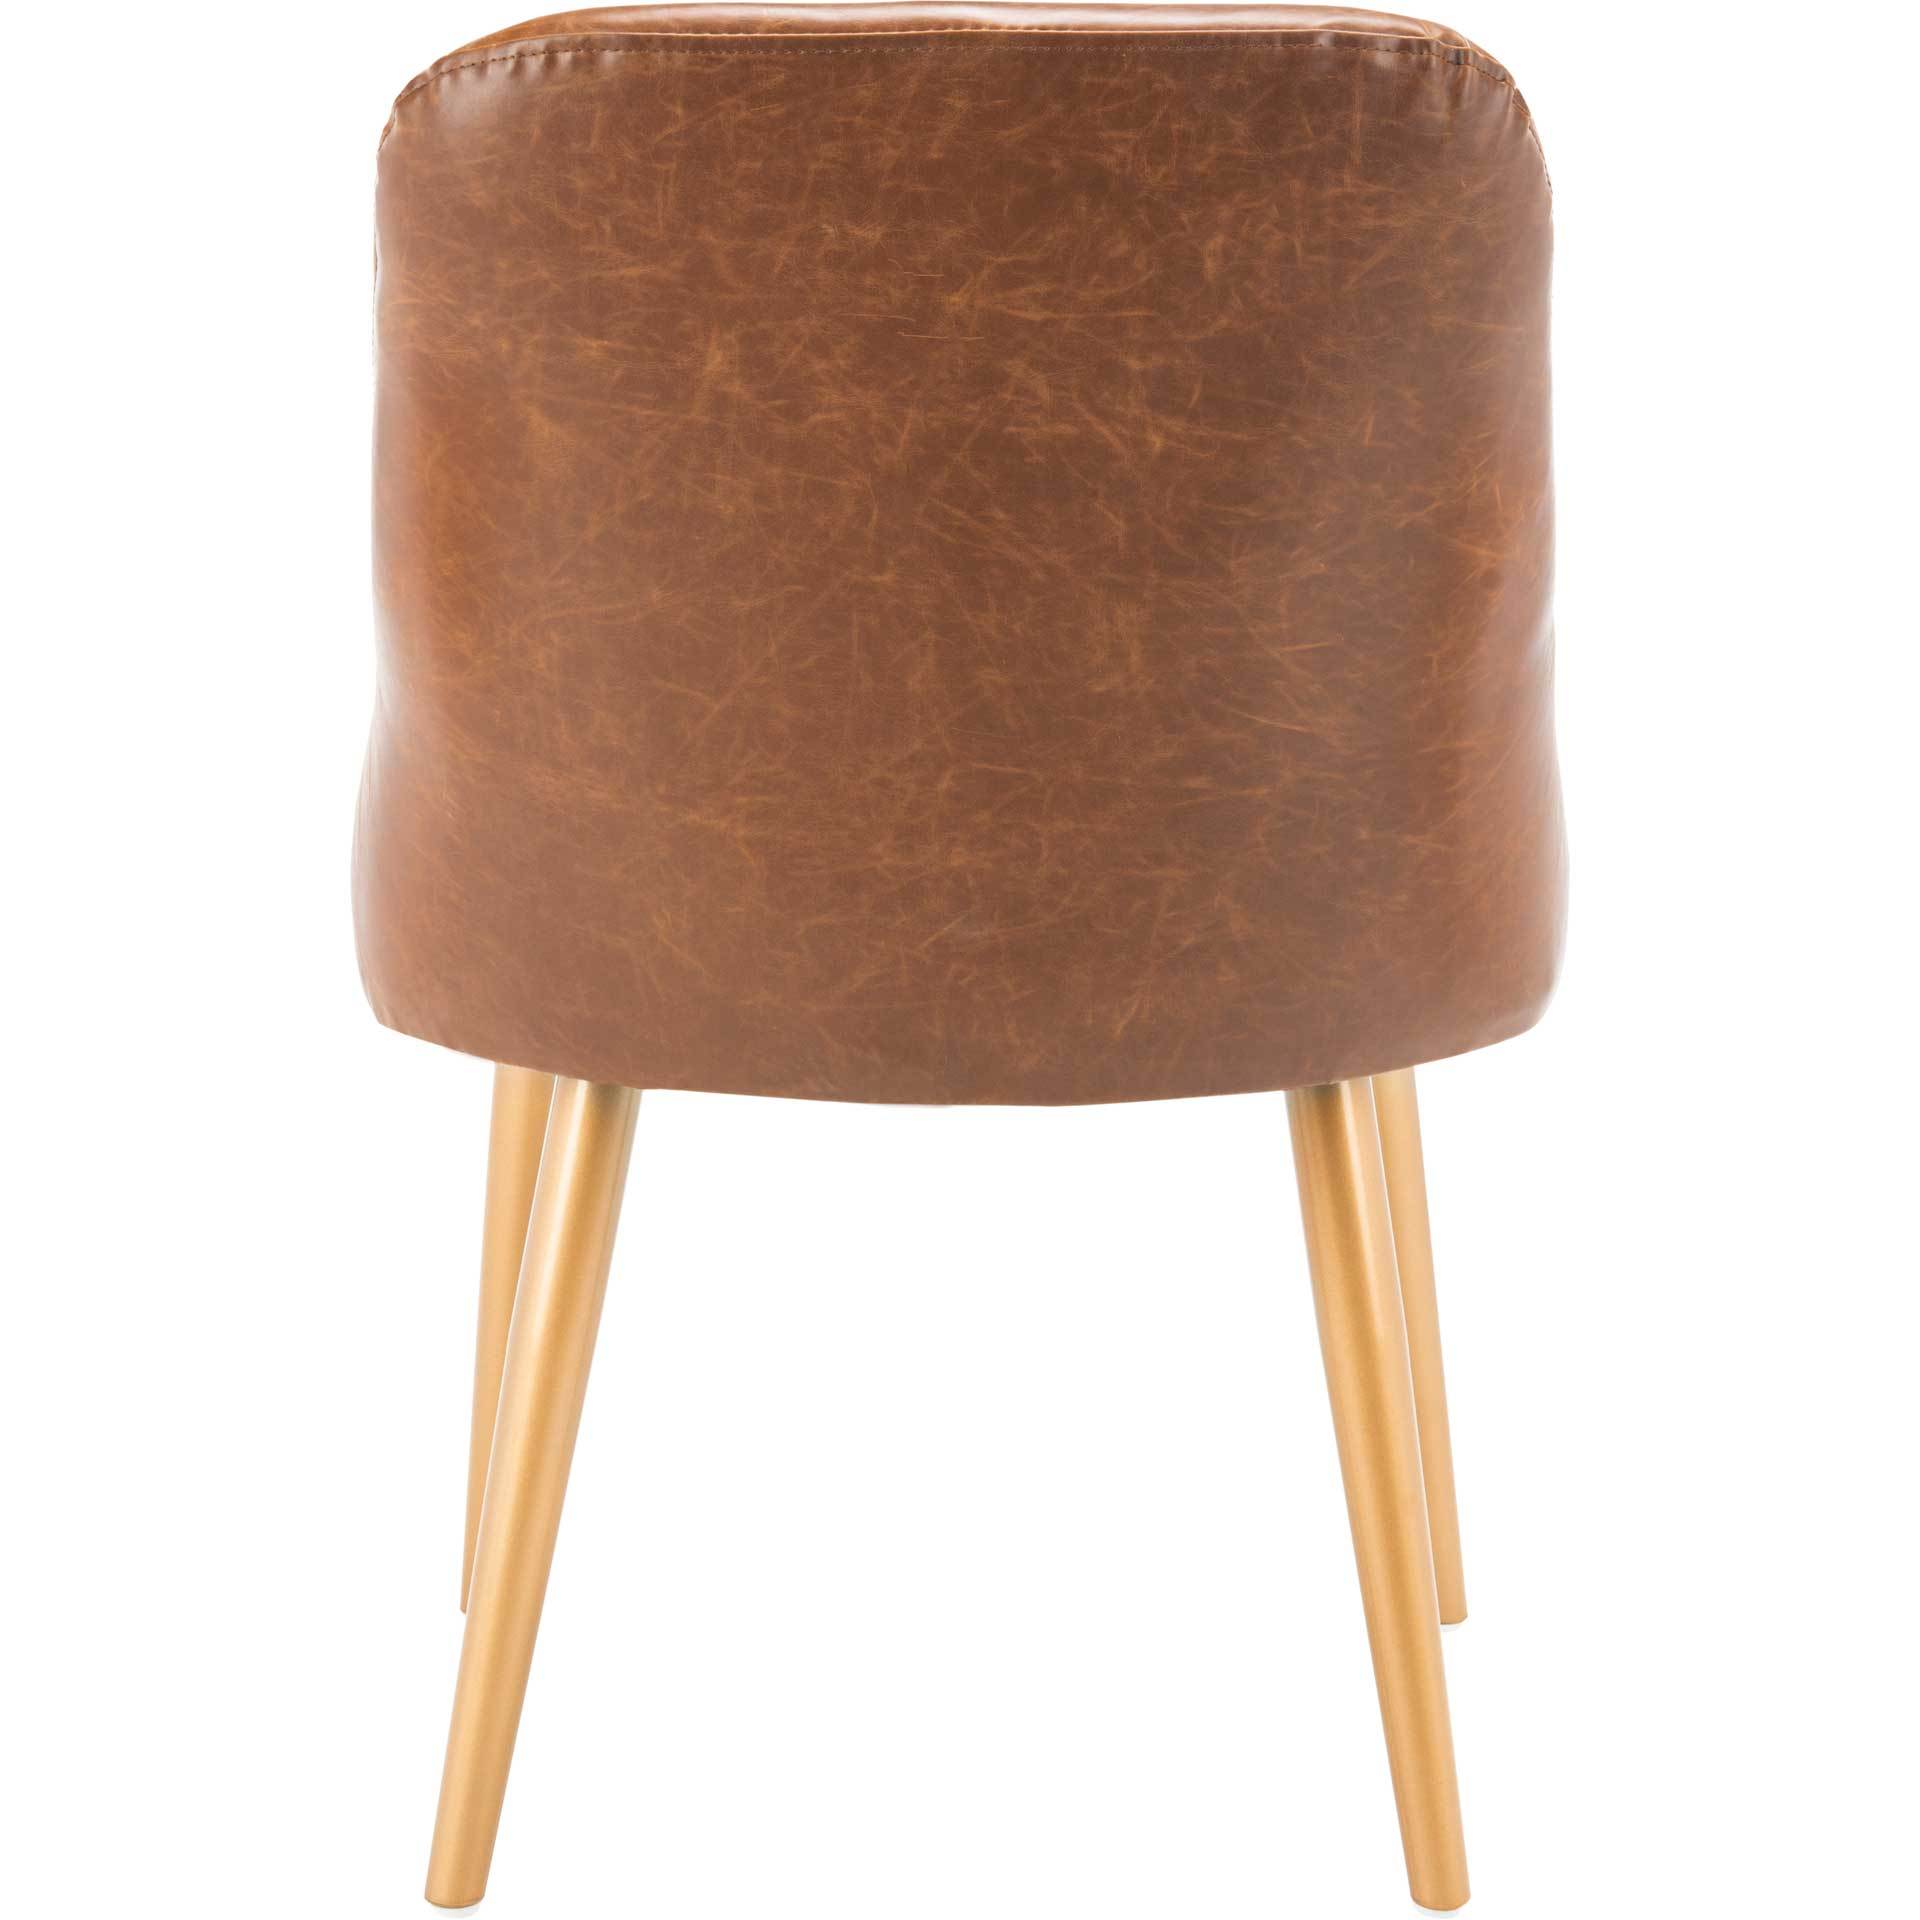 Luis Upholstered Dining Chair Light Brown/Gold (Set of 2)